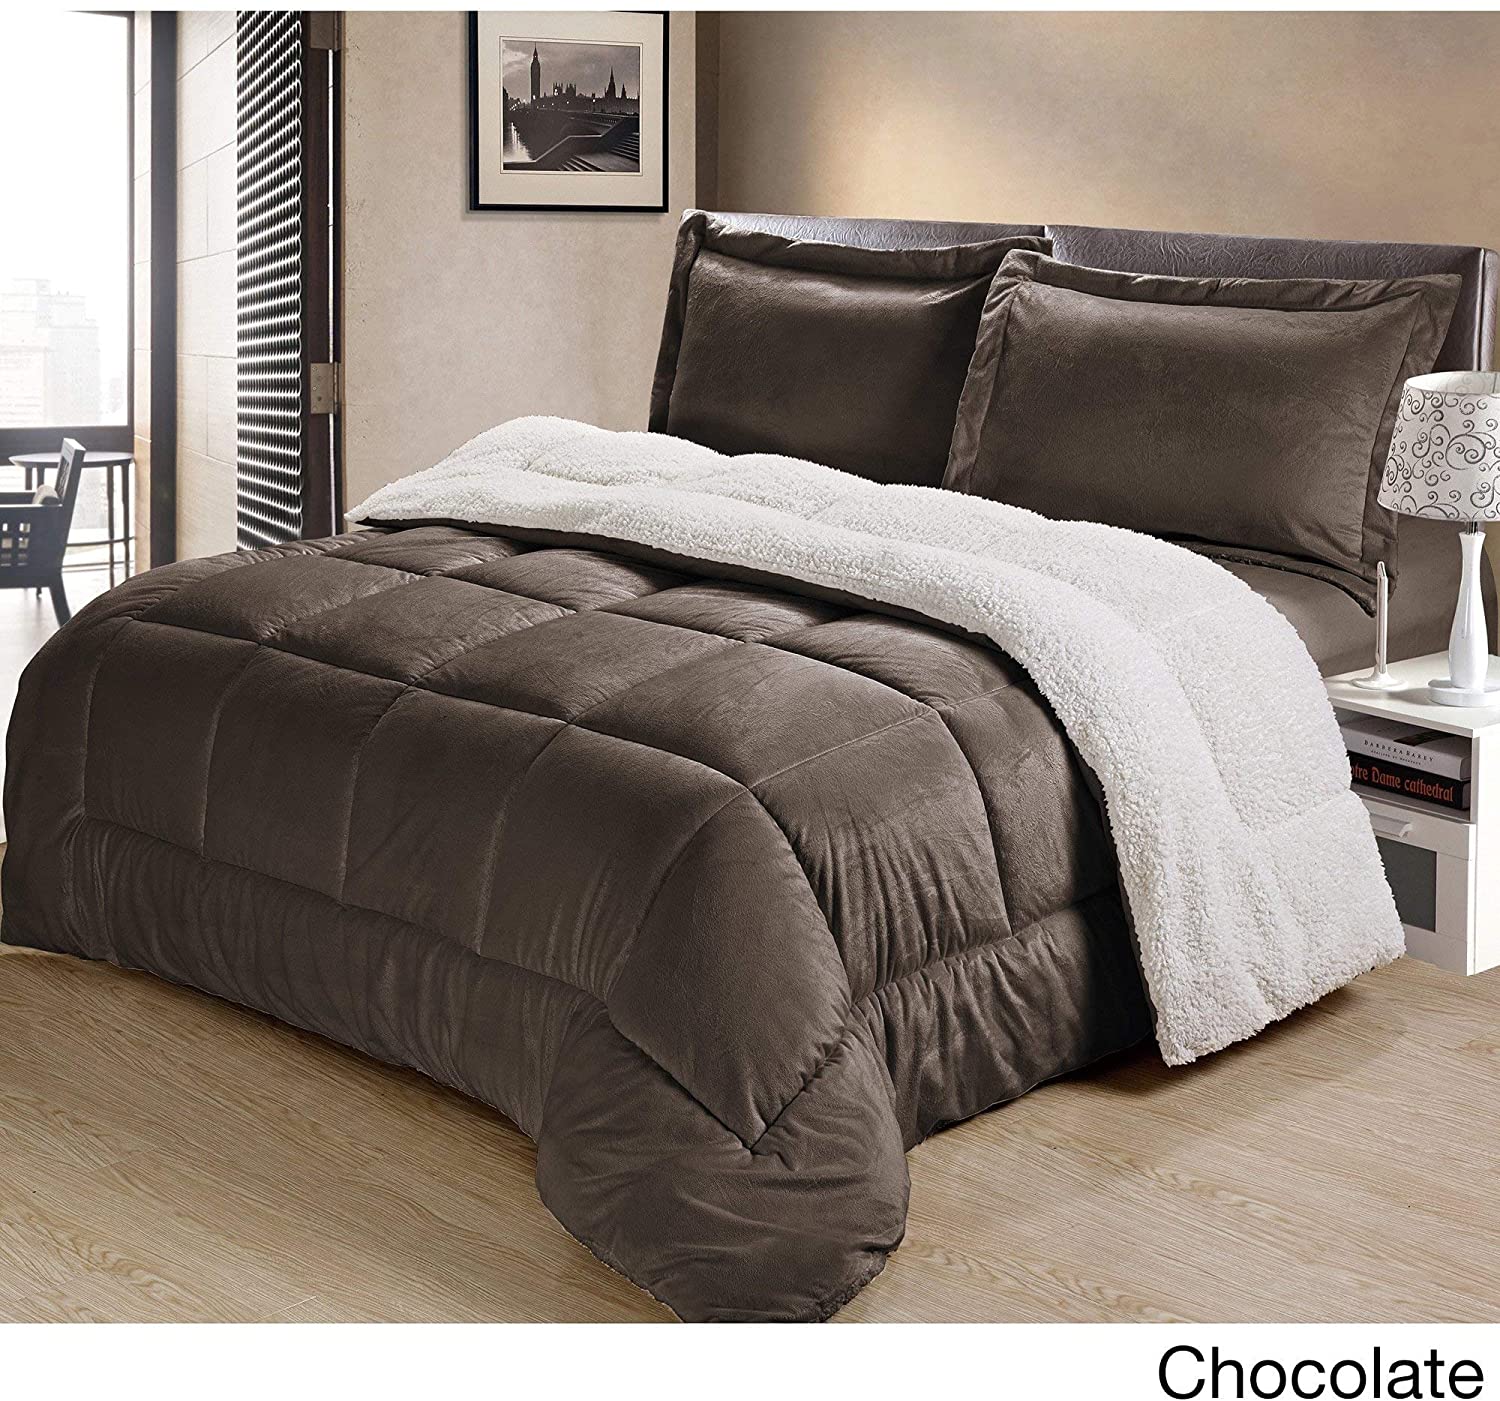 Cathay Home Ultimate Luxury Reversible Micromink and Sherpa Bedding Comforter Set